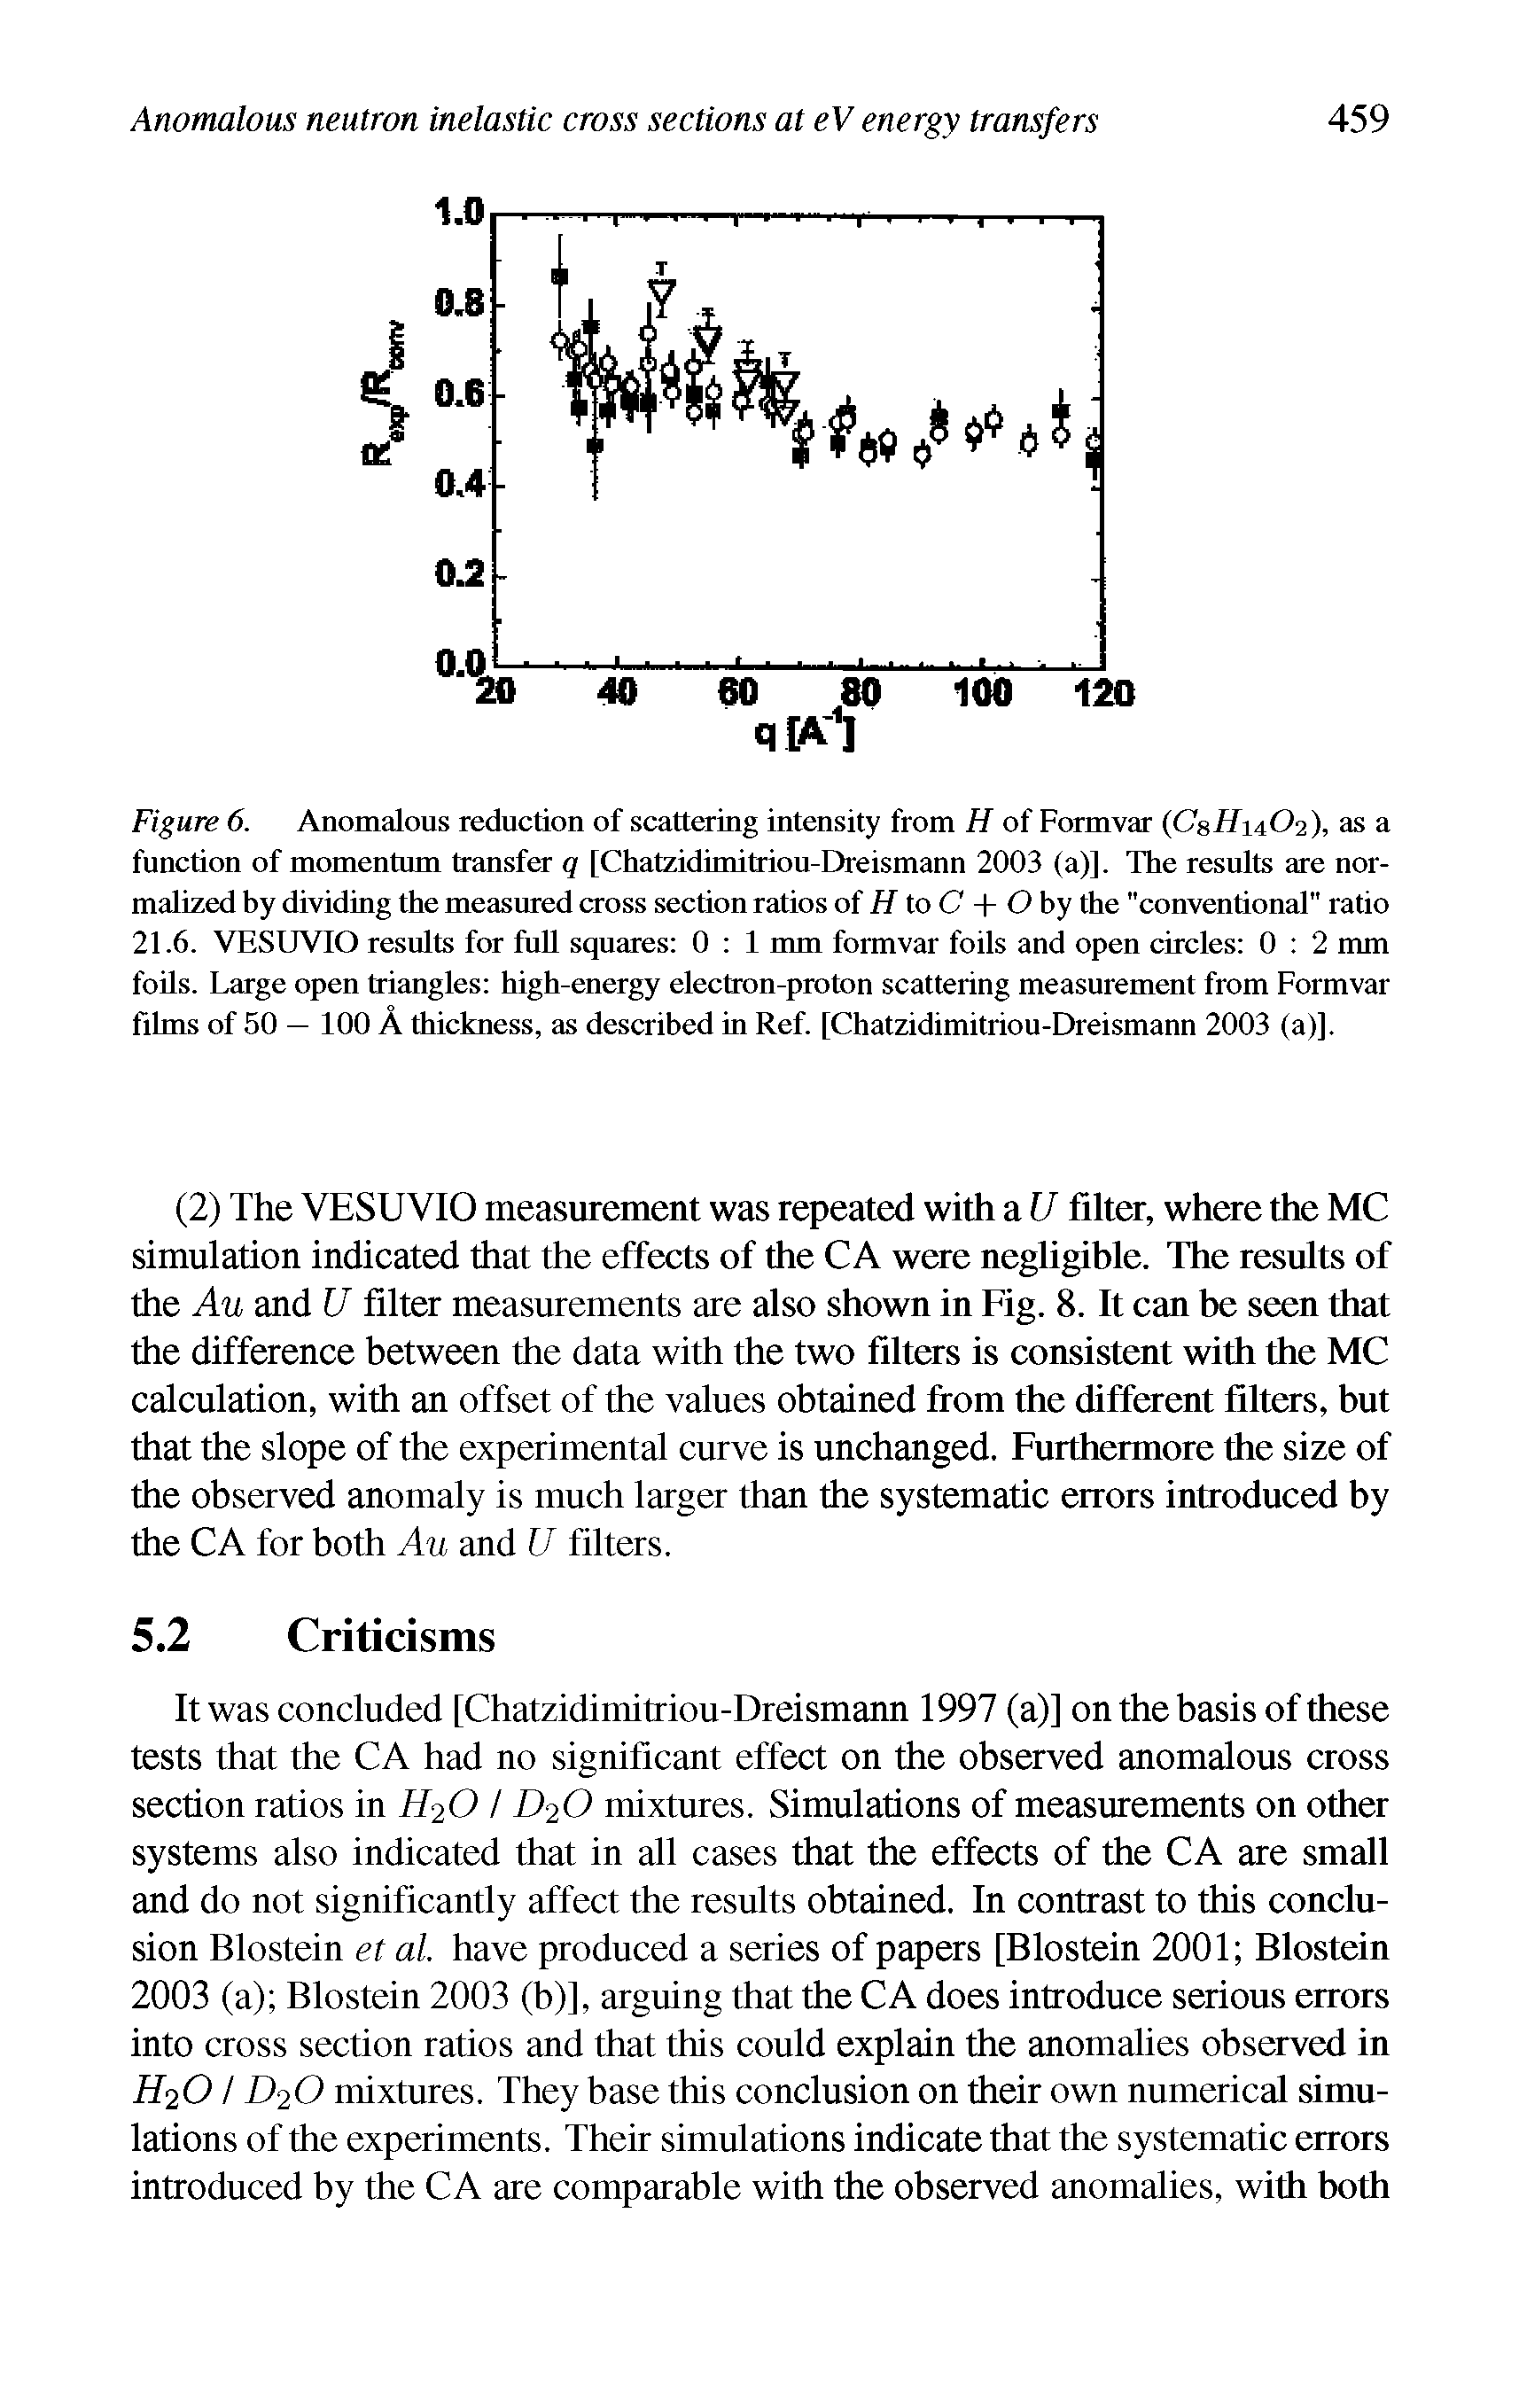 Figure 6. Anomalous reduction of scattering intensity from H of Formvar (Ch/L/iLL), as a function of momentum transfer q [Chatzidimitriou-Dreismann 2003 (a)]. The results are normalized by dividing the measured cross section ratios of H to C + O by the "conventional" ratio 21.6. VESUVIO results for full squares 0 1 mm formvar foils and open circles 0 2 mm foils. Large open triangles high-energy electron-proton scattering measurement from Formvar films of 50 — 100 A thickness, as described in Ref. [Chatzidimitriou-Dreismann 2003 (a)].